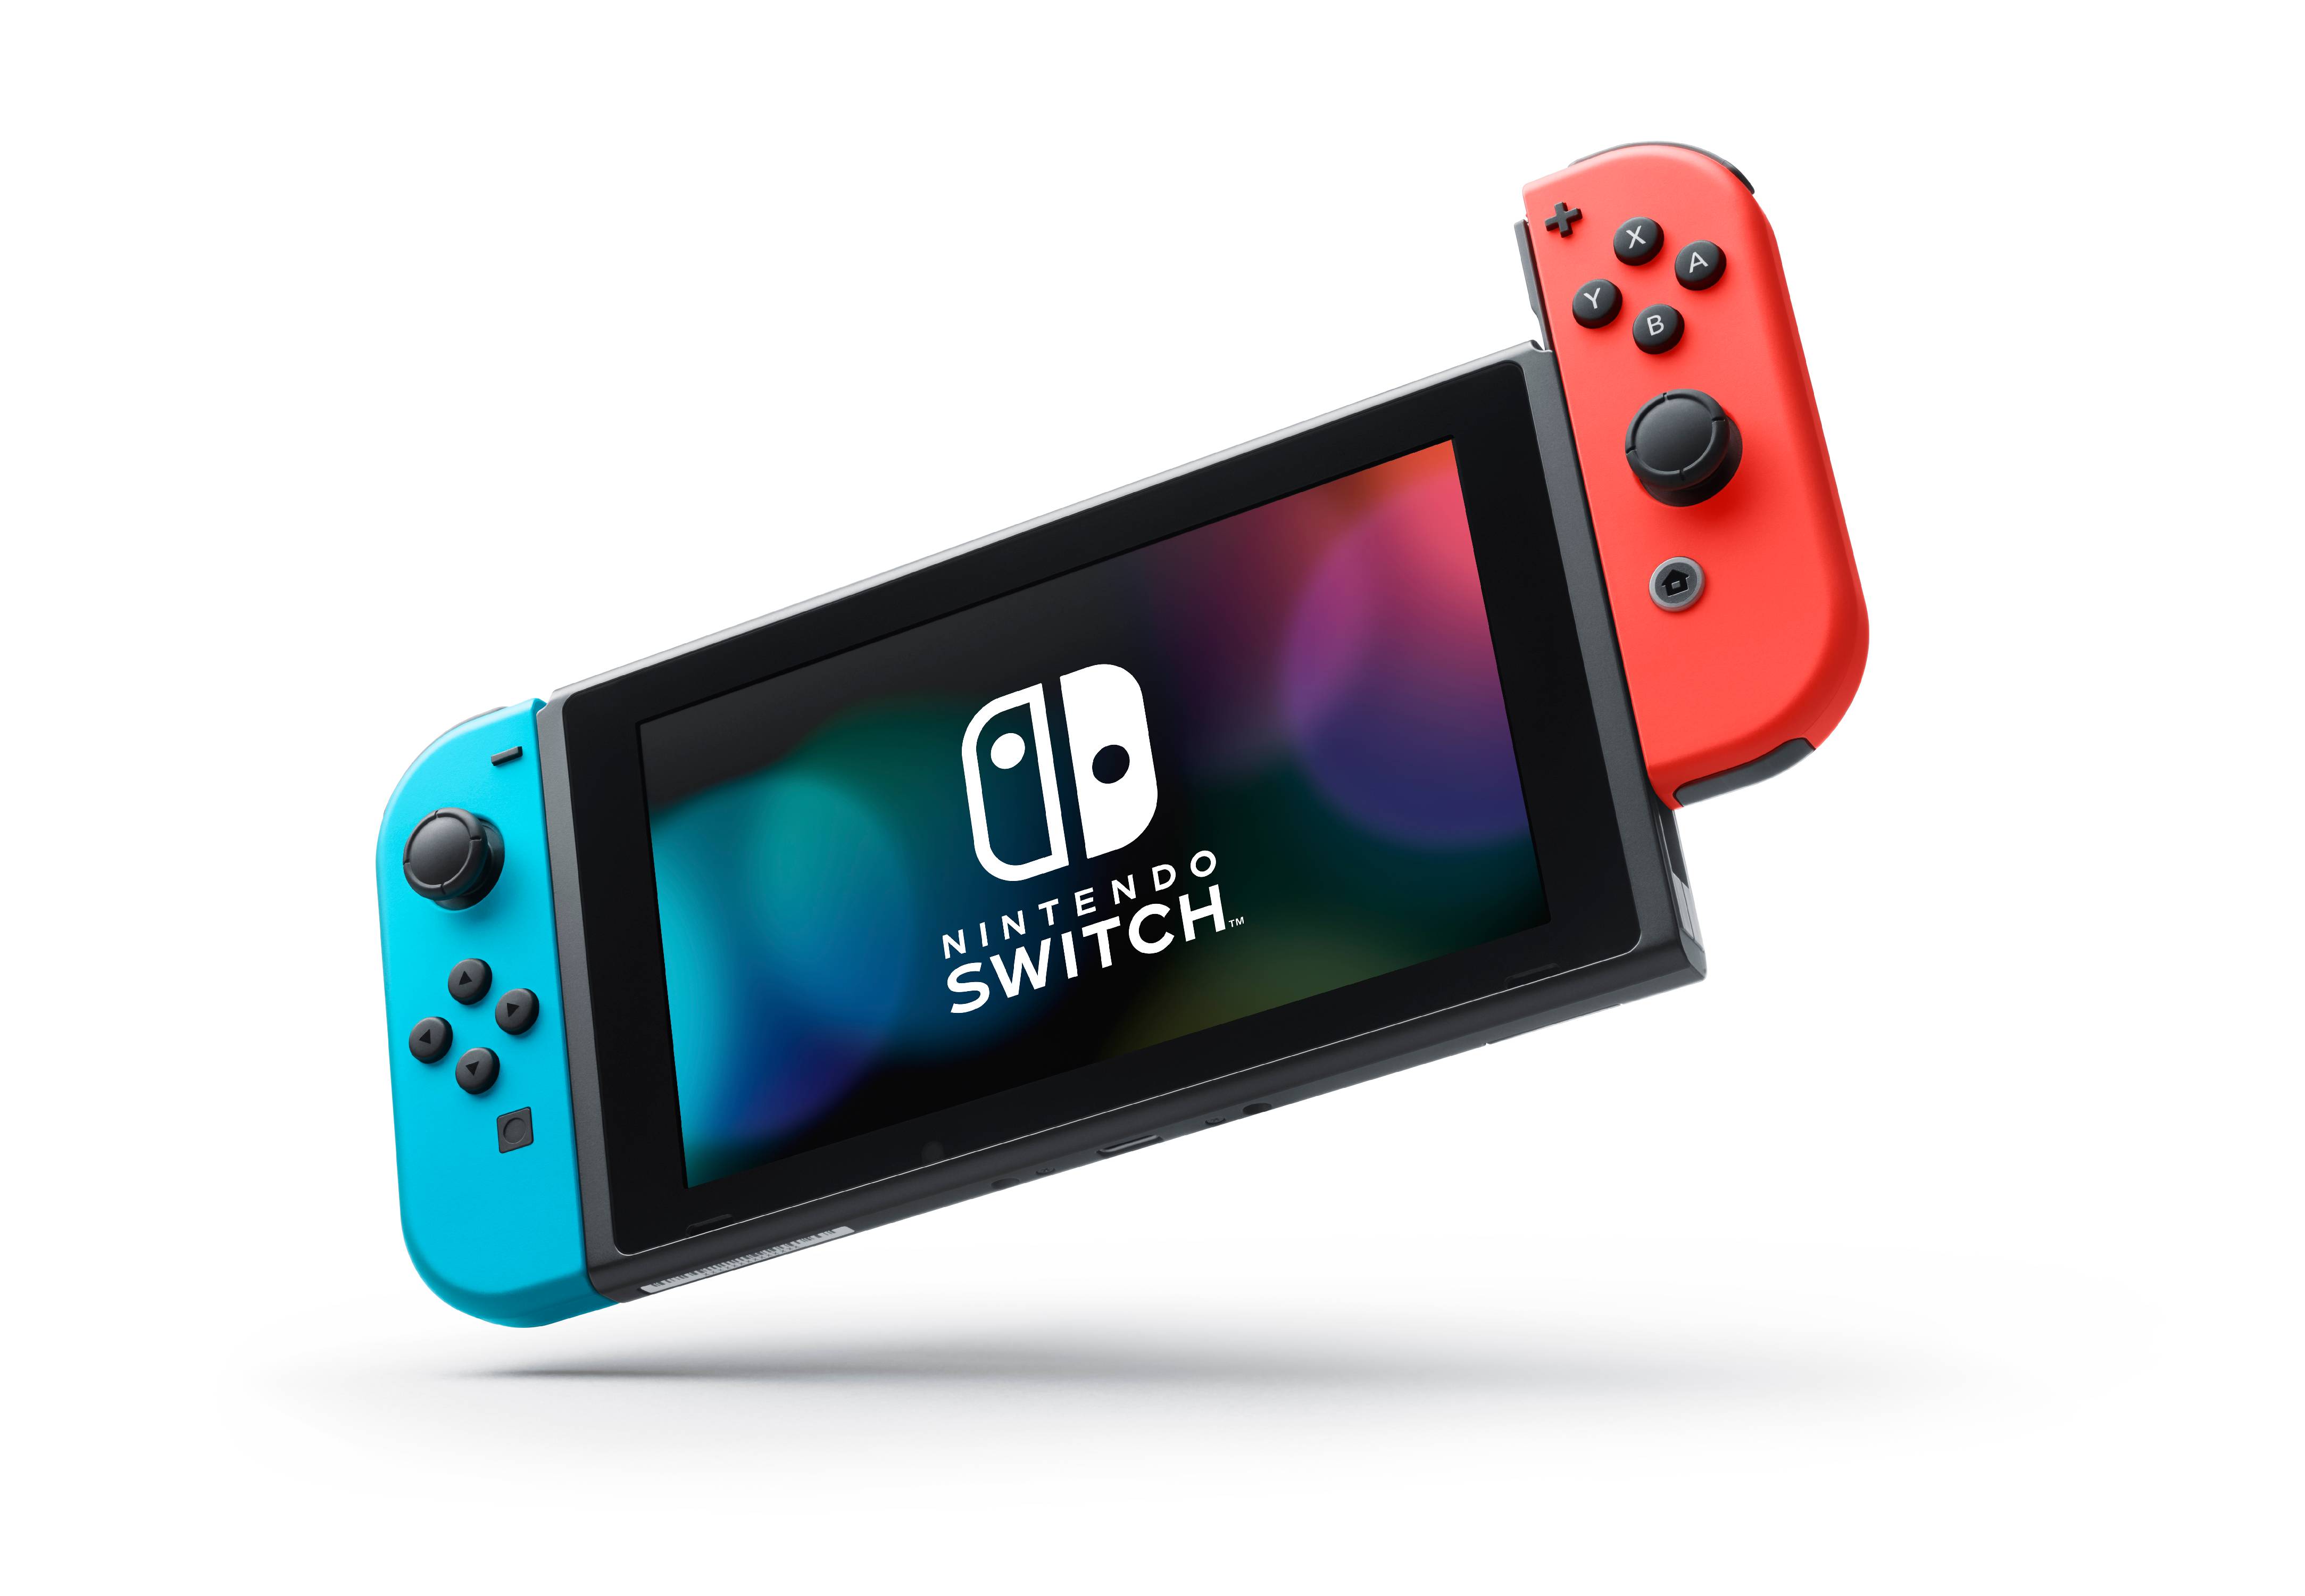 Nintendo Switch Gaming Console Neon Blue and Neon Red Joy-Con Bundle with Mario Kart Deluxe 8 - image 4 of 4